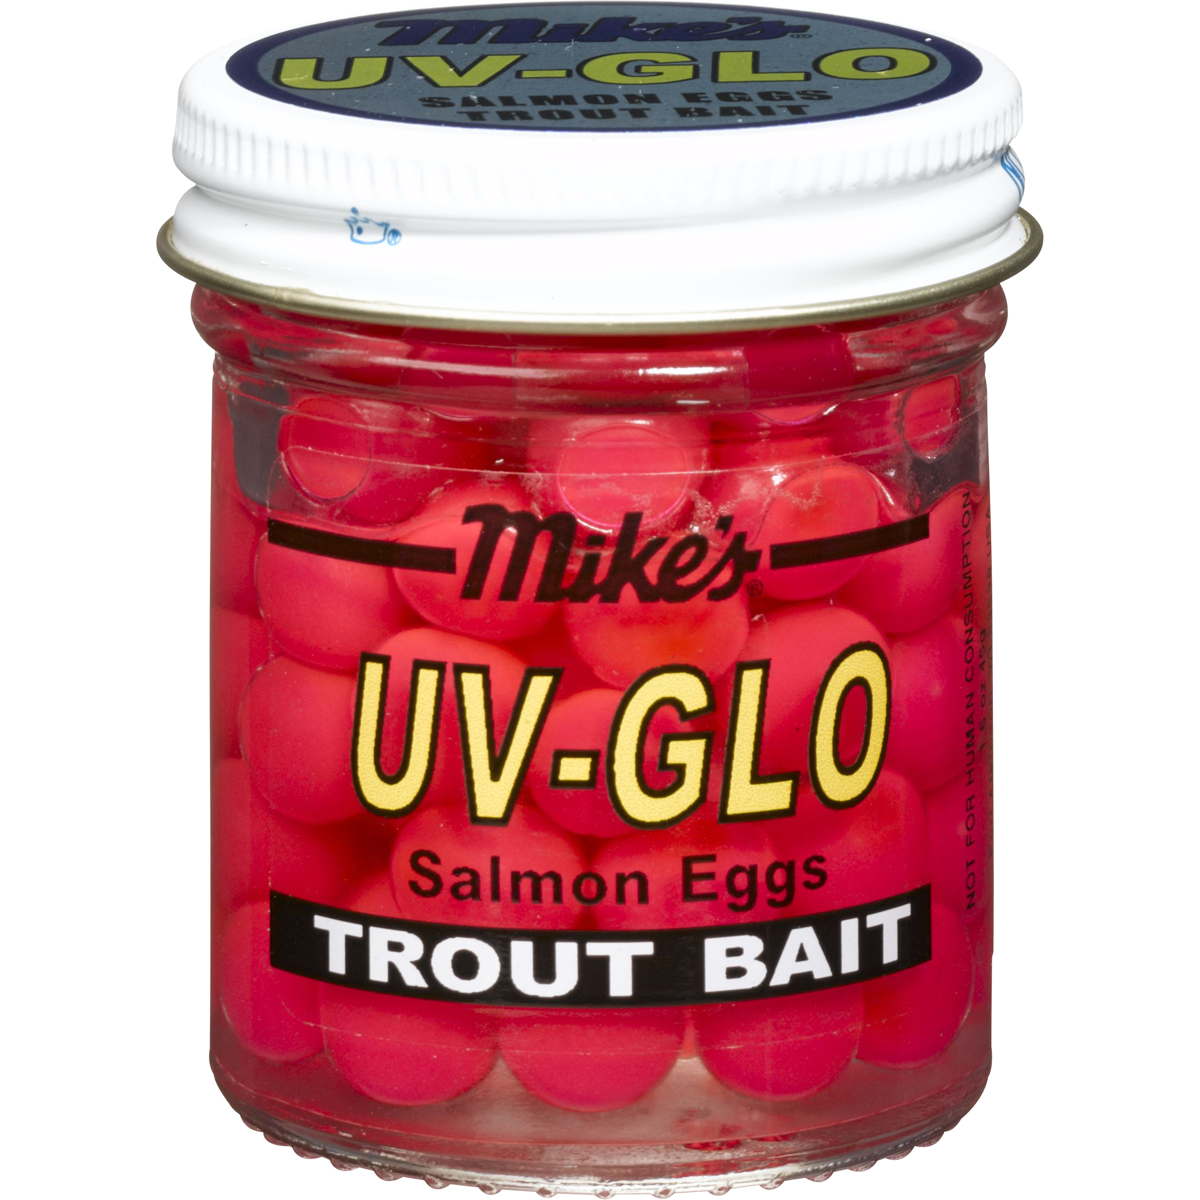 Photo of Atlas-Mike's UV Glo Eggs for sale at United Tackle Shops.